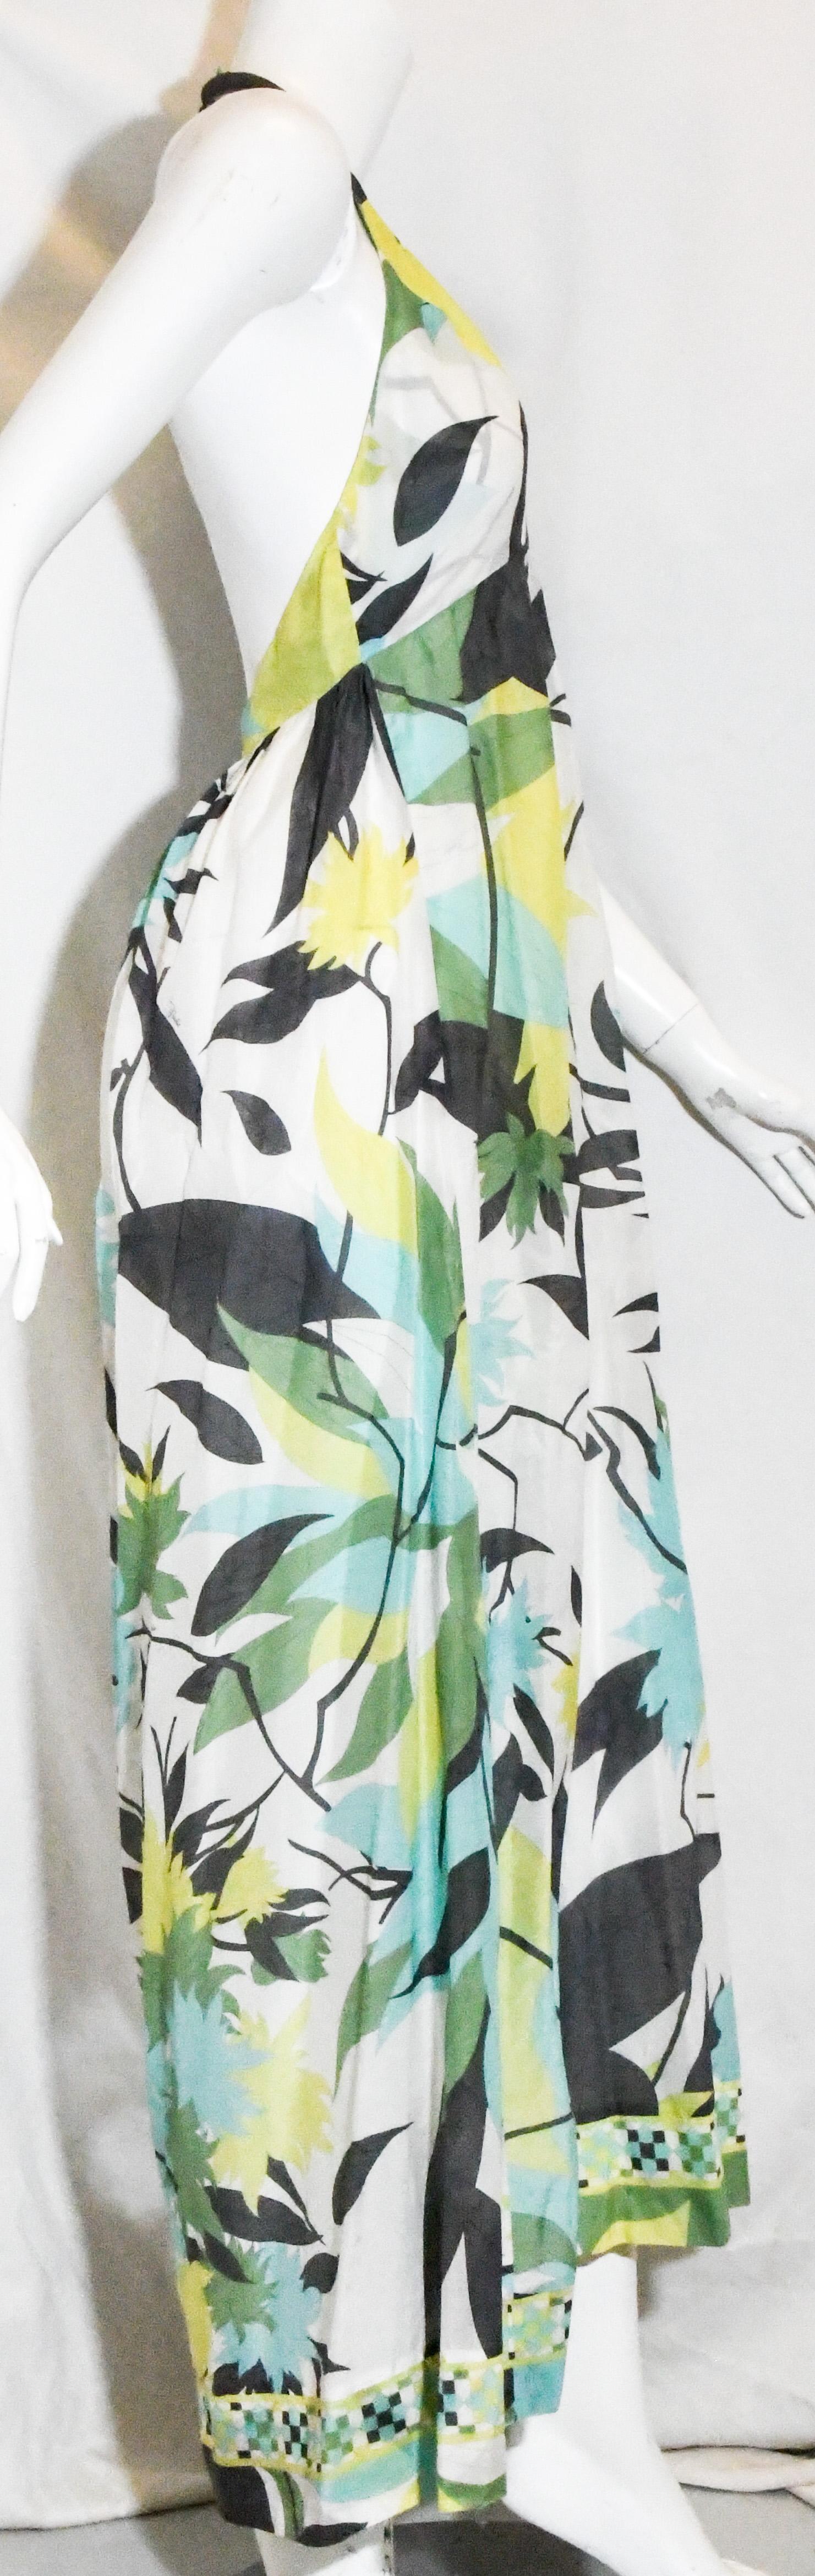 Emilio Pucci halter V neck abstract floral print dress with bare back and asymmetric hemline.  This dress is shorter at front with gathered skirt.  Enjoy this dress for day or night, casual and classy.   Dress is in excellent condition.  Made in